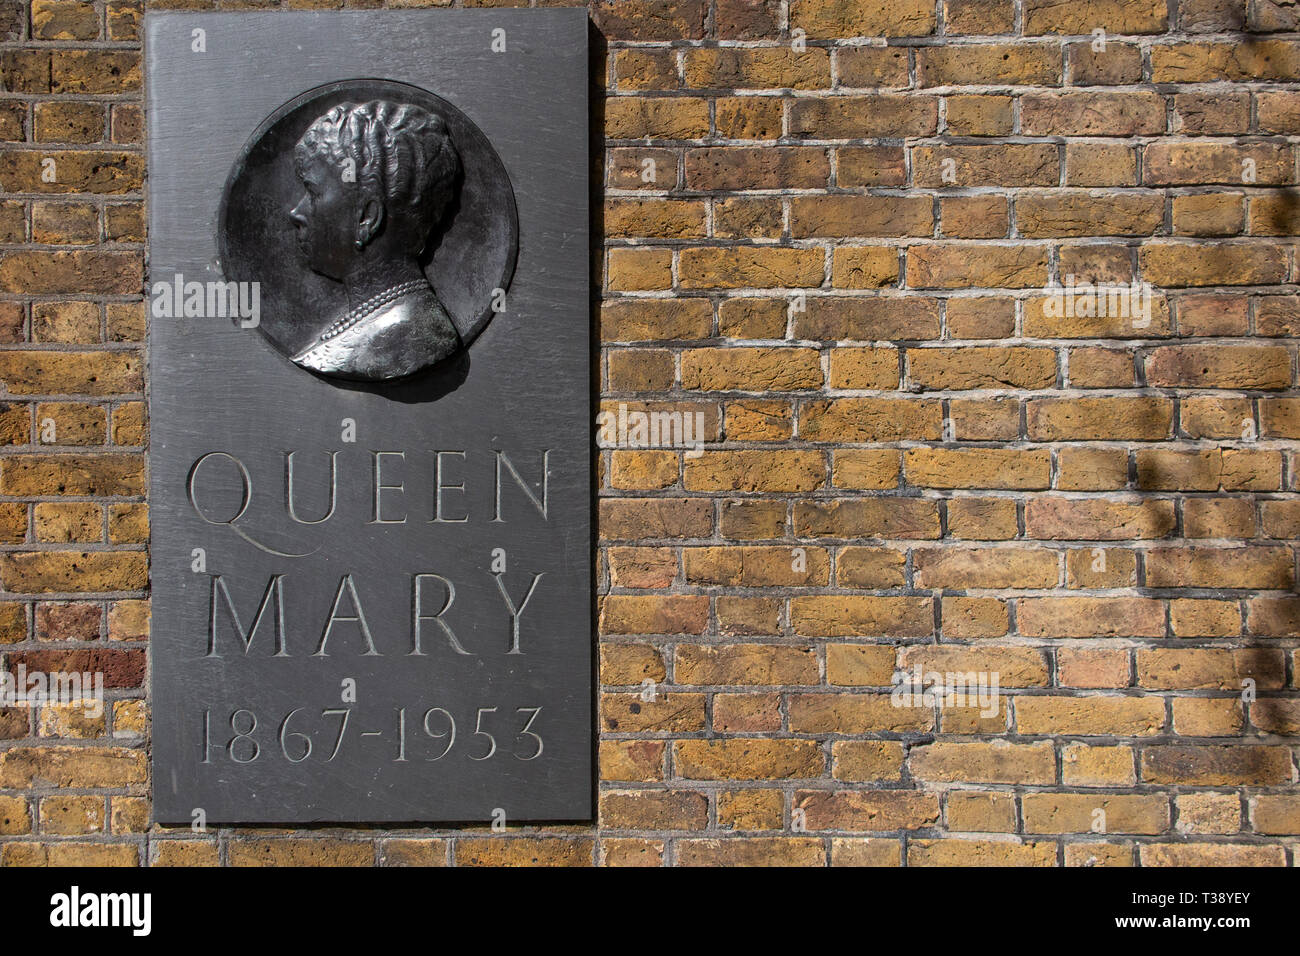 A brass plaque in memory of Queen Mary in Central London at Marlborough House Stock Photo